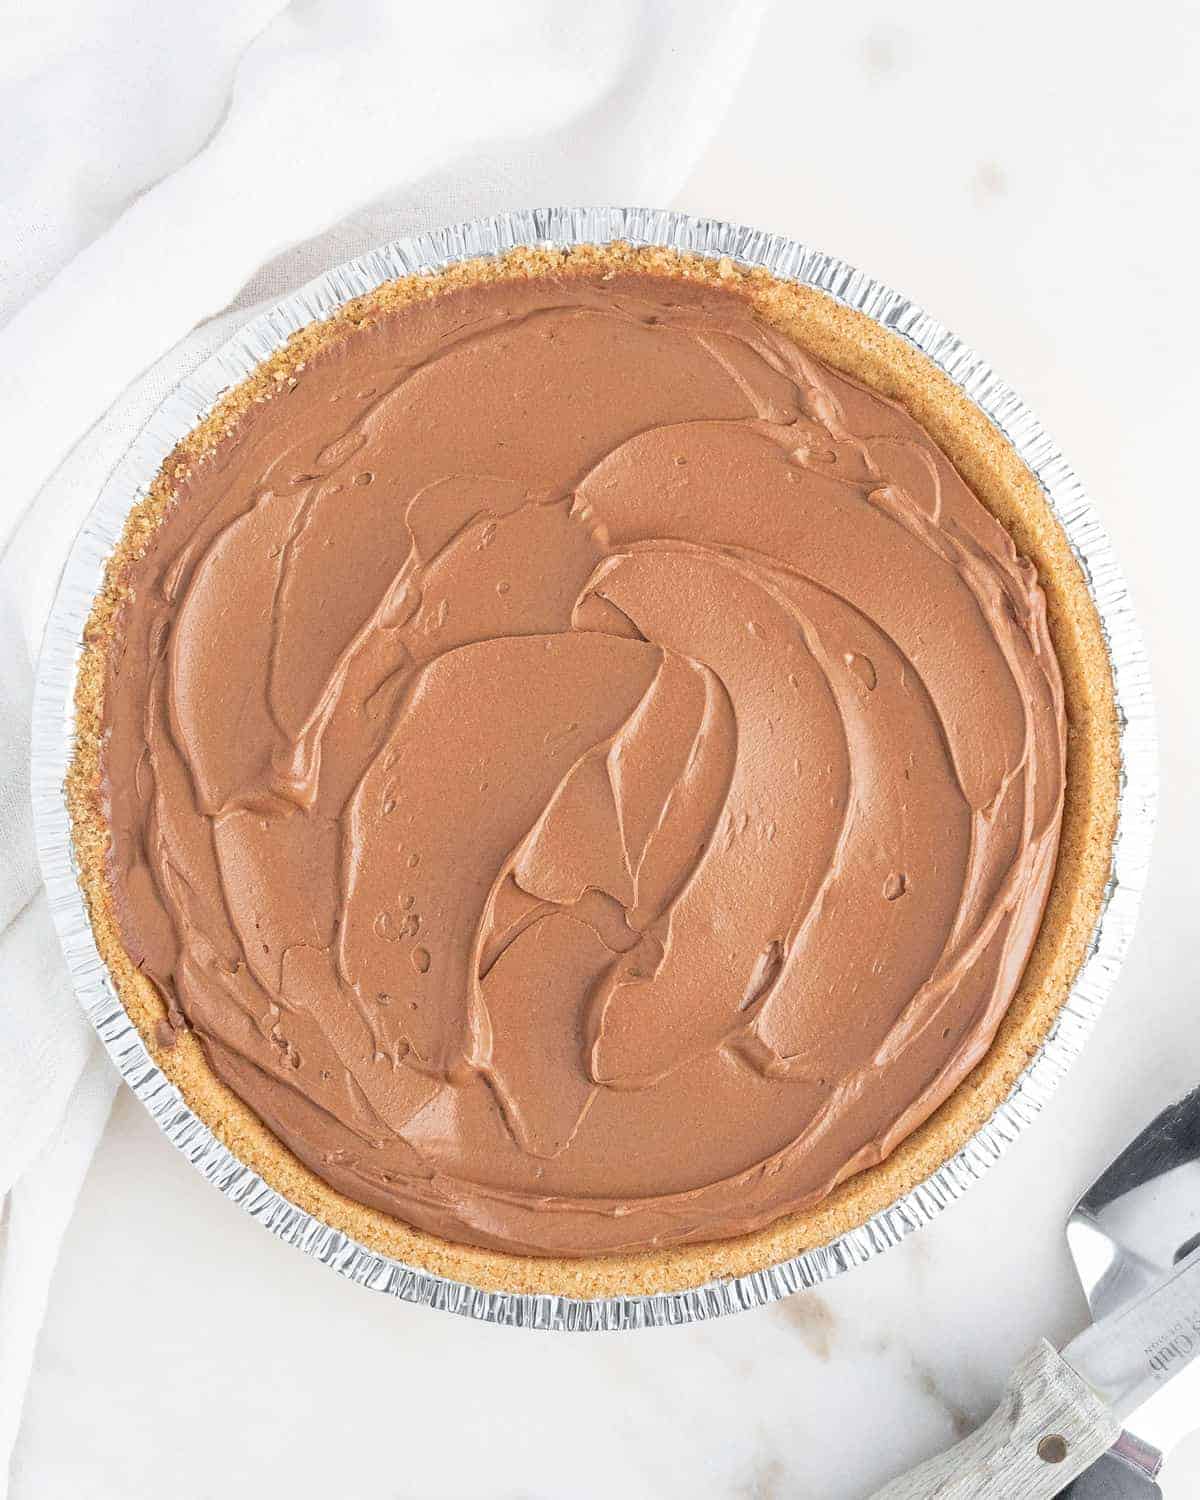 completed chocolate pie against light surface